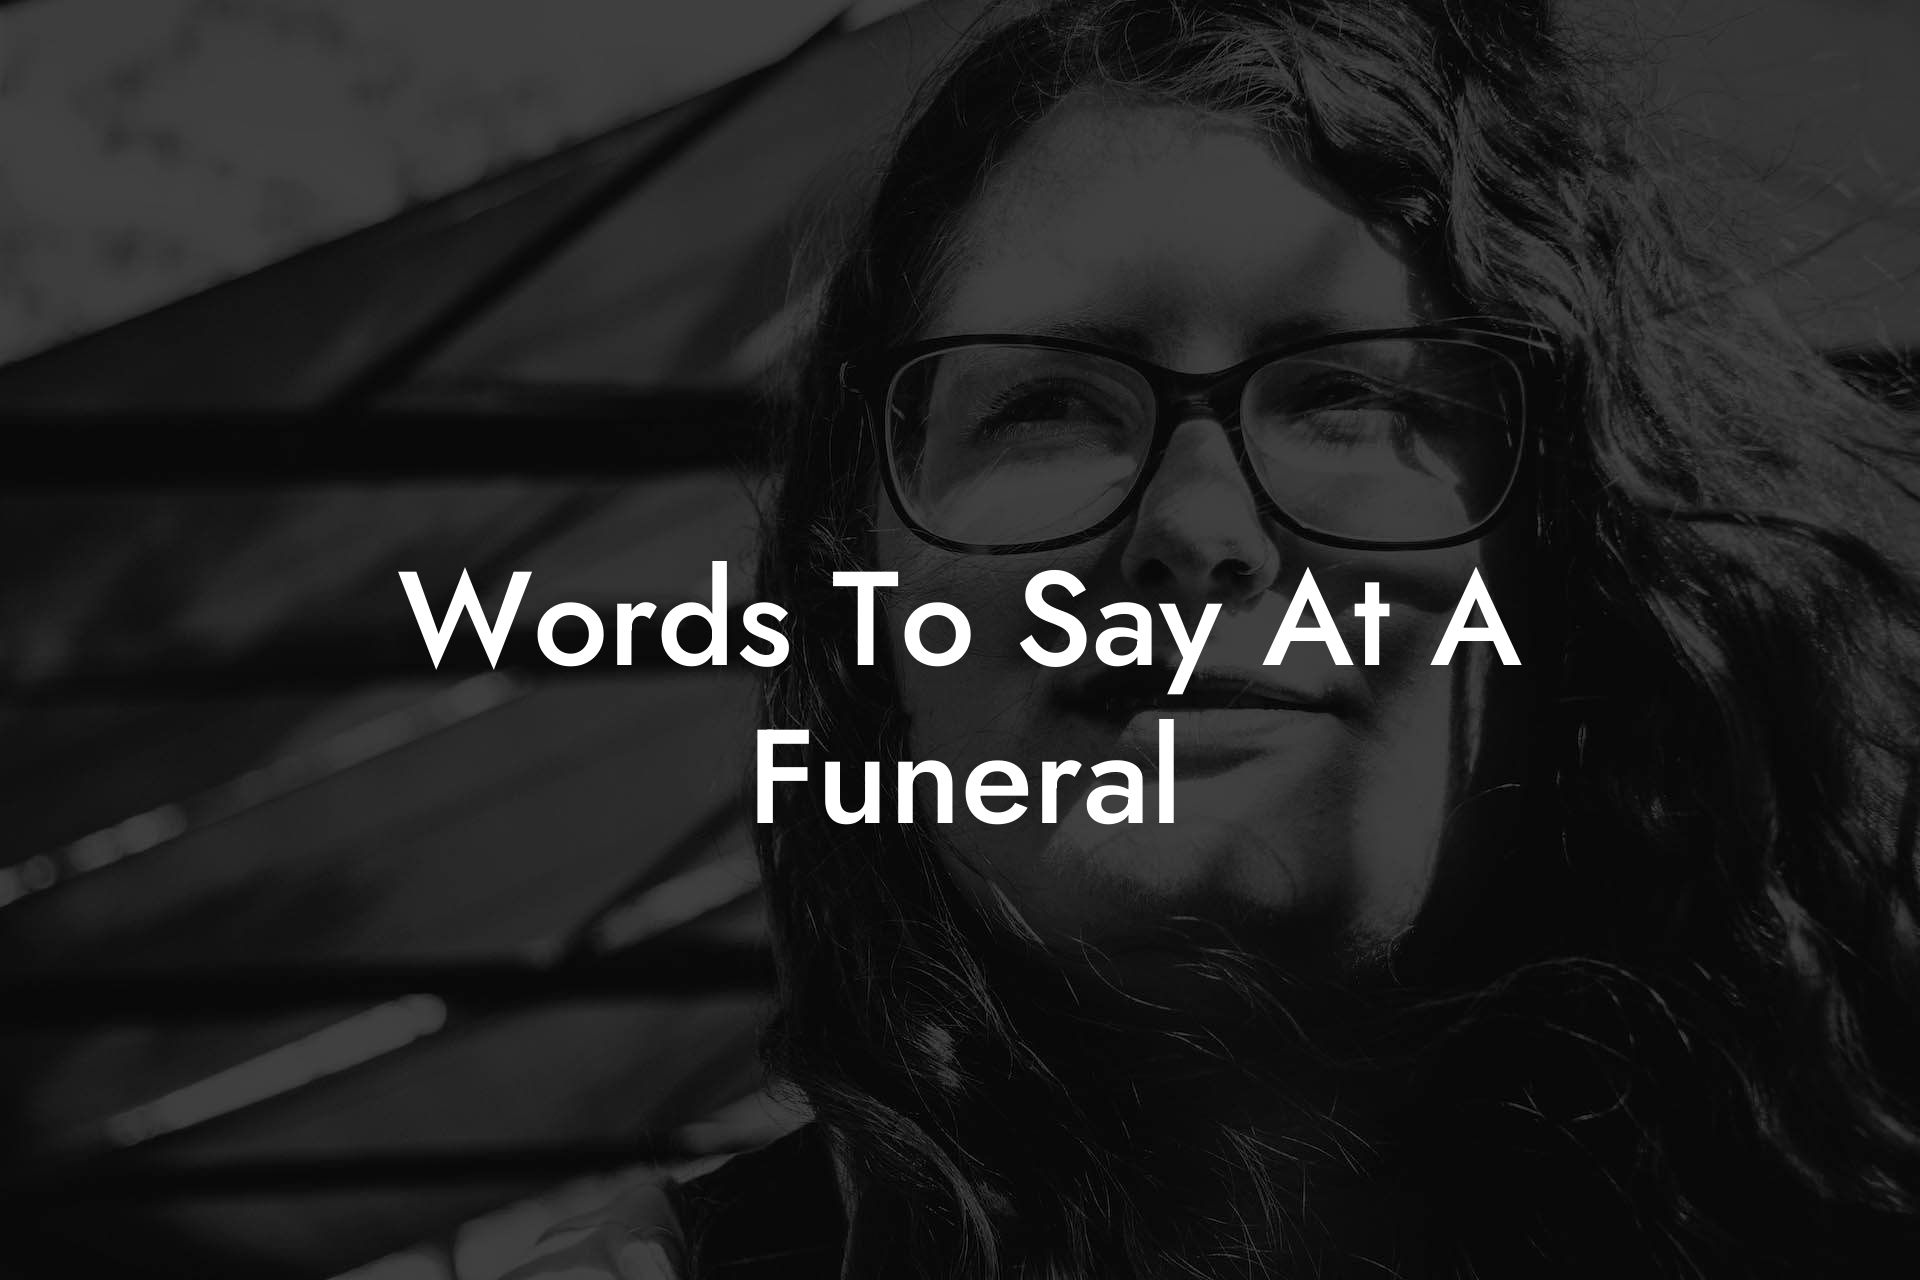 Words To Say At A Funeral